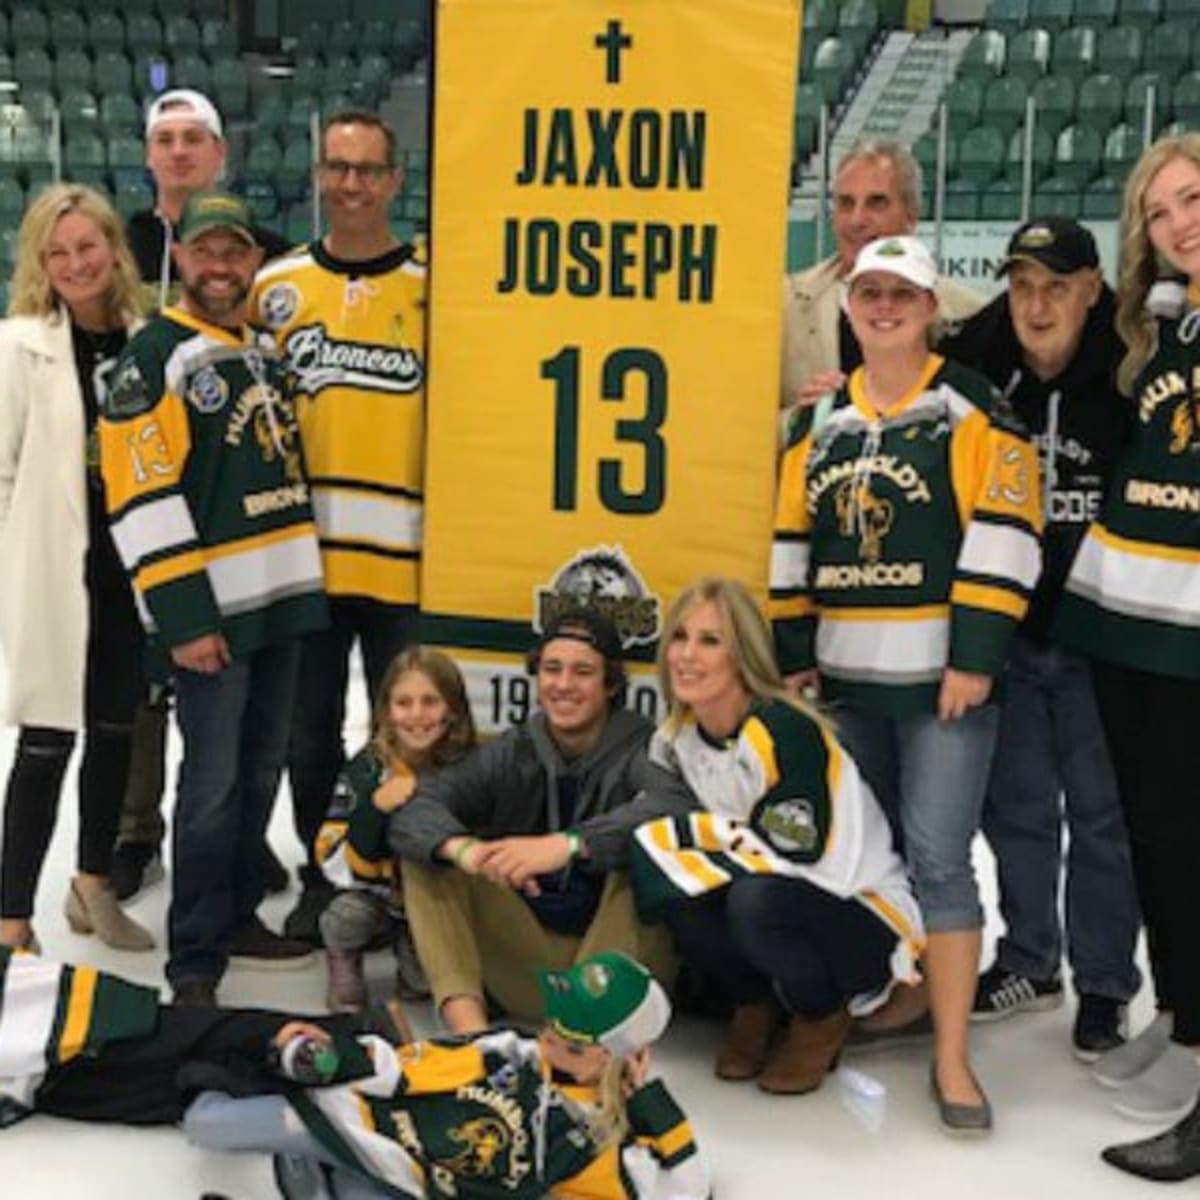 Hockey at heart of healing process for Humboldt